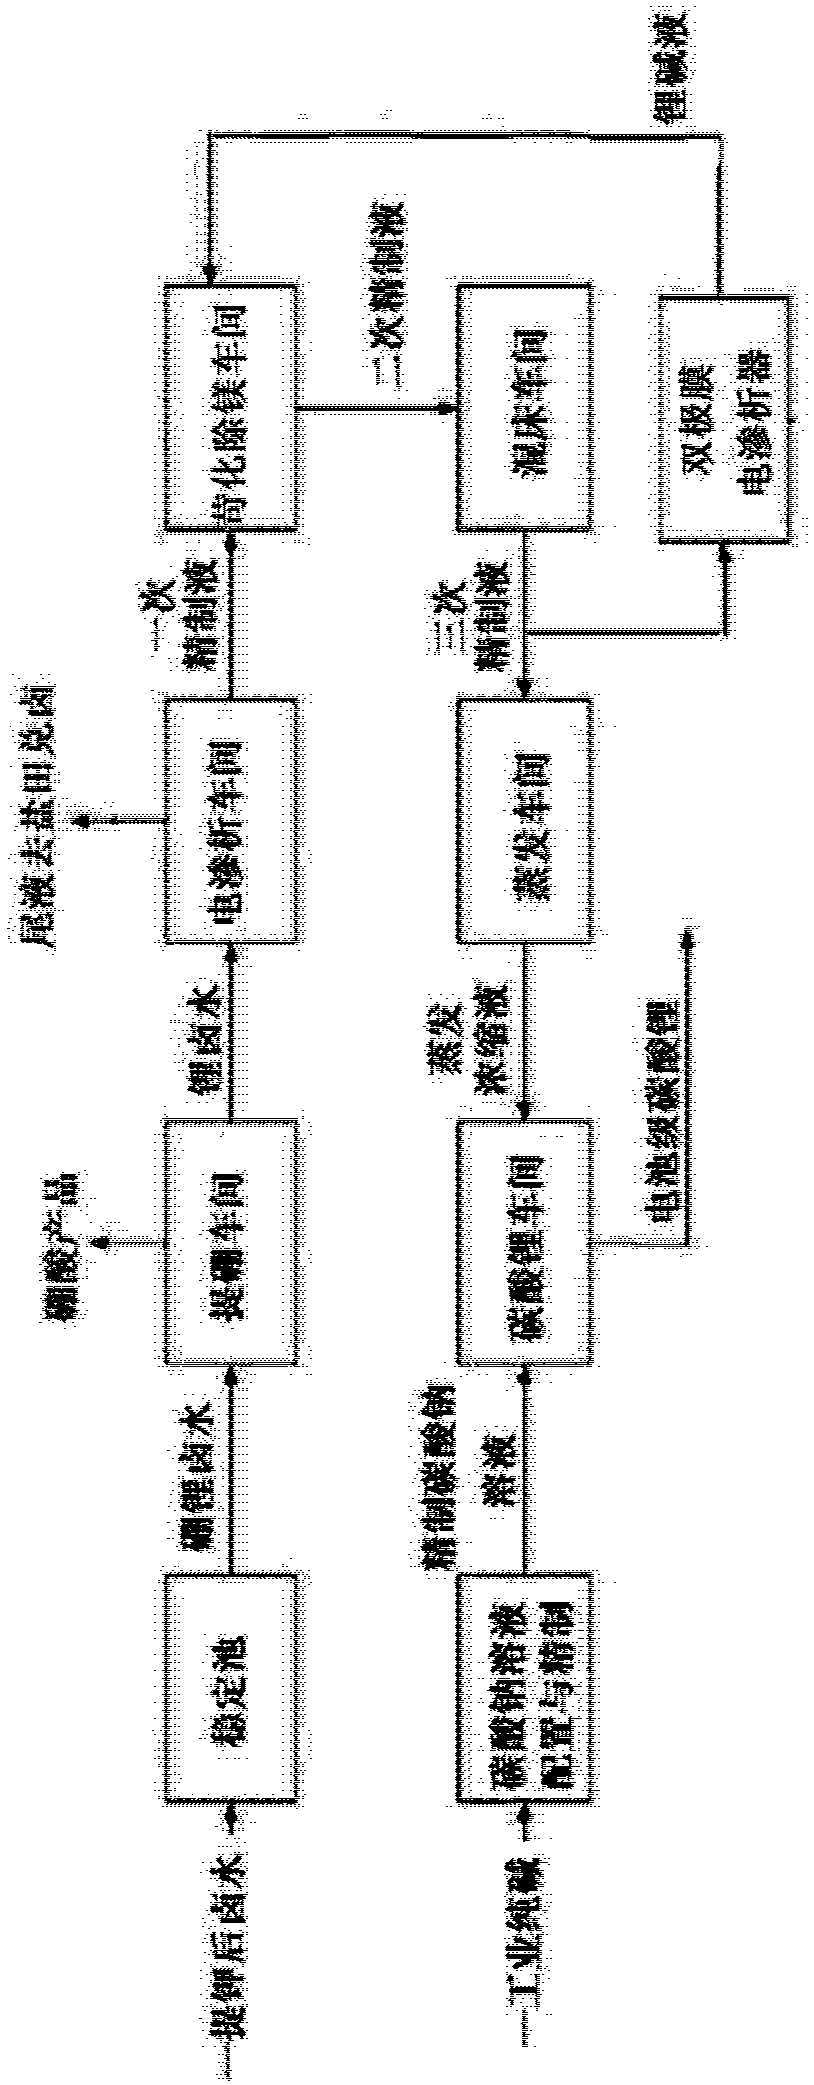 Method for directly preparing lithium carbonate from salt lake brine with high magnesium-to-lithium ratio